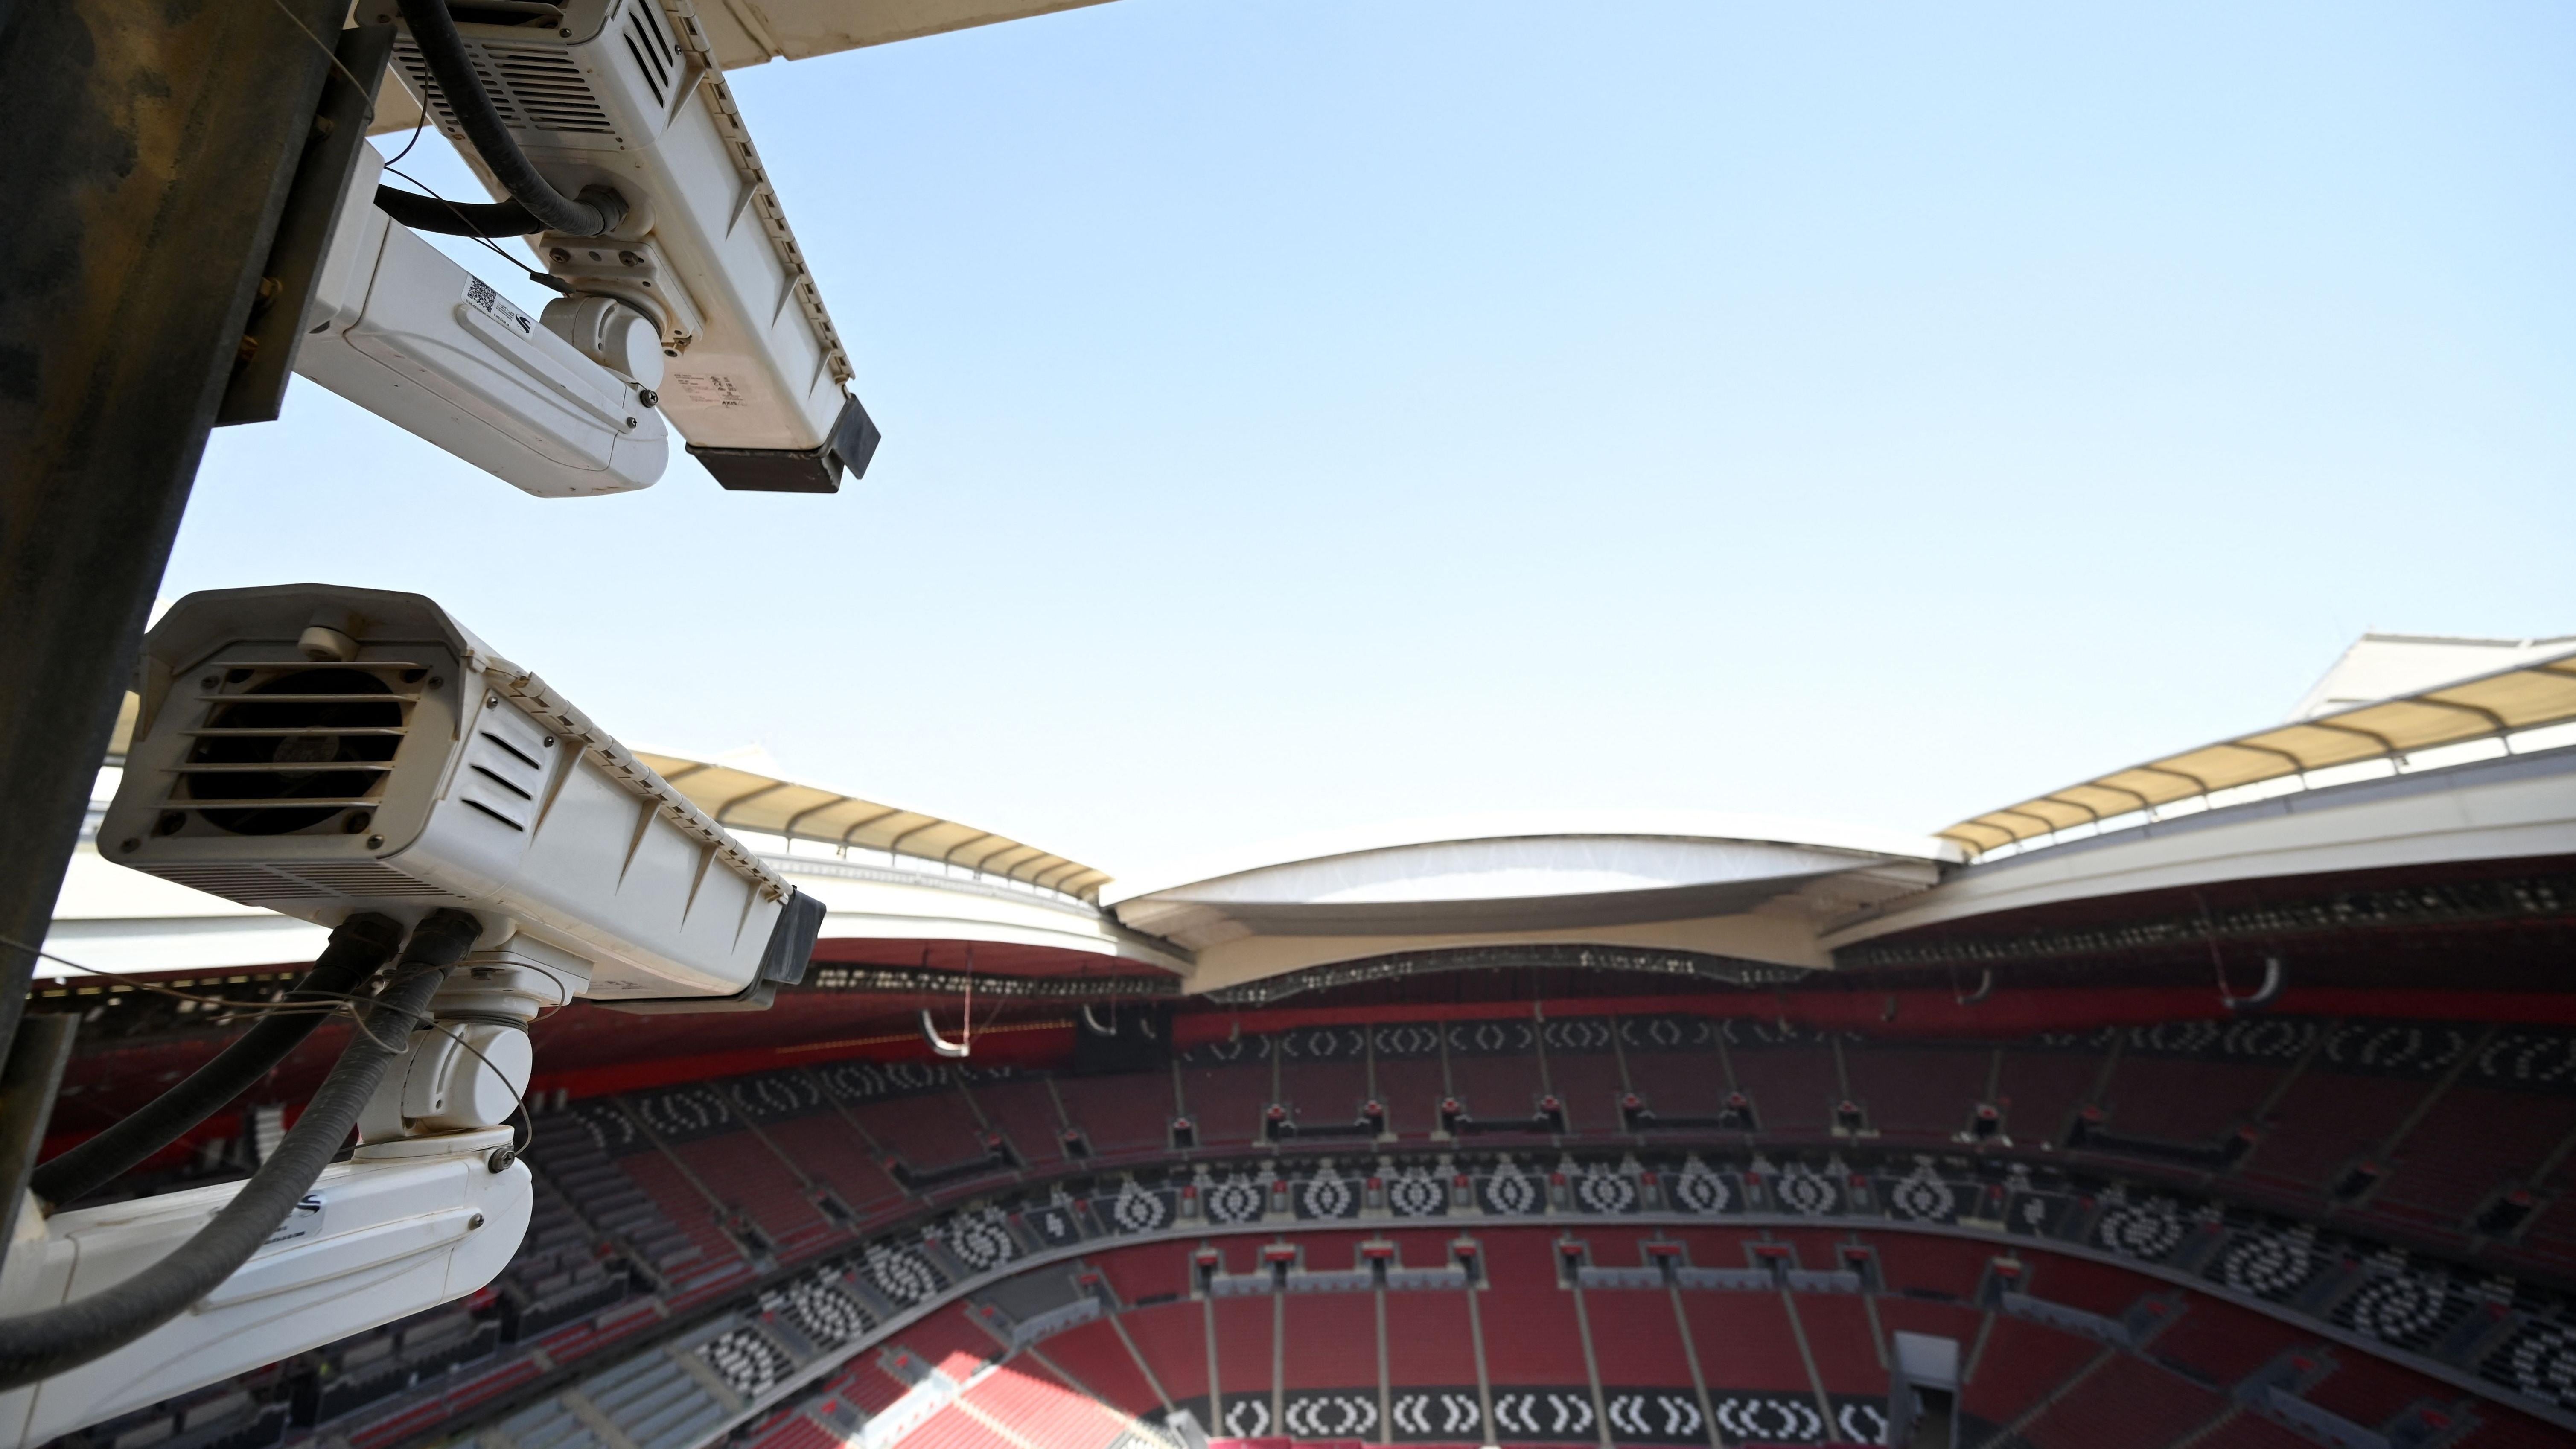 Cameras are pictured on March 28, 2022 above Qatar's Al-Bayt Stadium in Doha, which will host matches of the FIFA football World Cup 2022 (Photo: Gabriel Bouys, Getty Images)